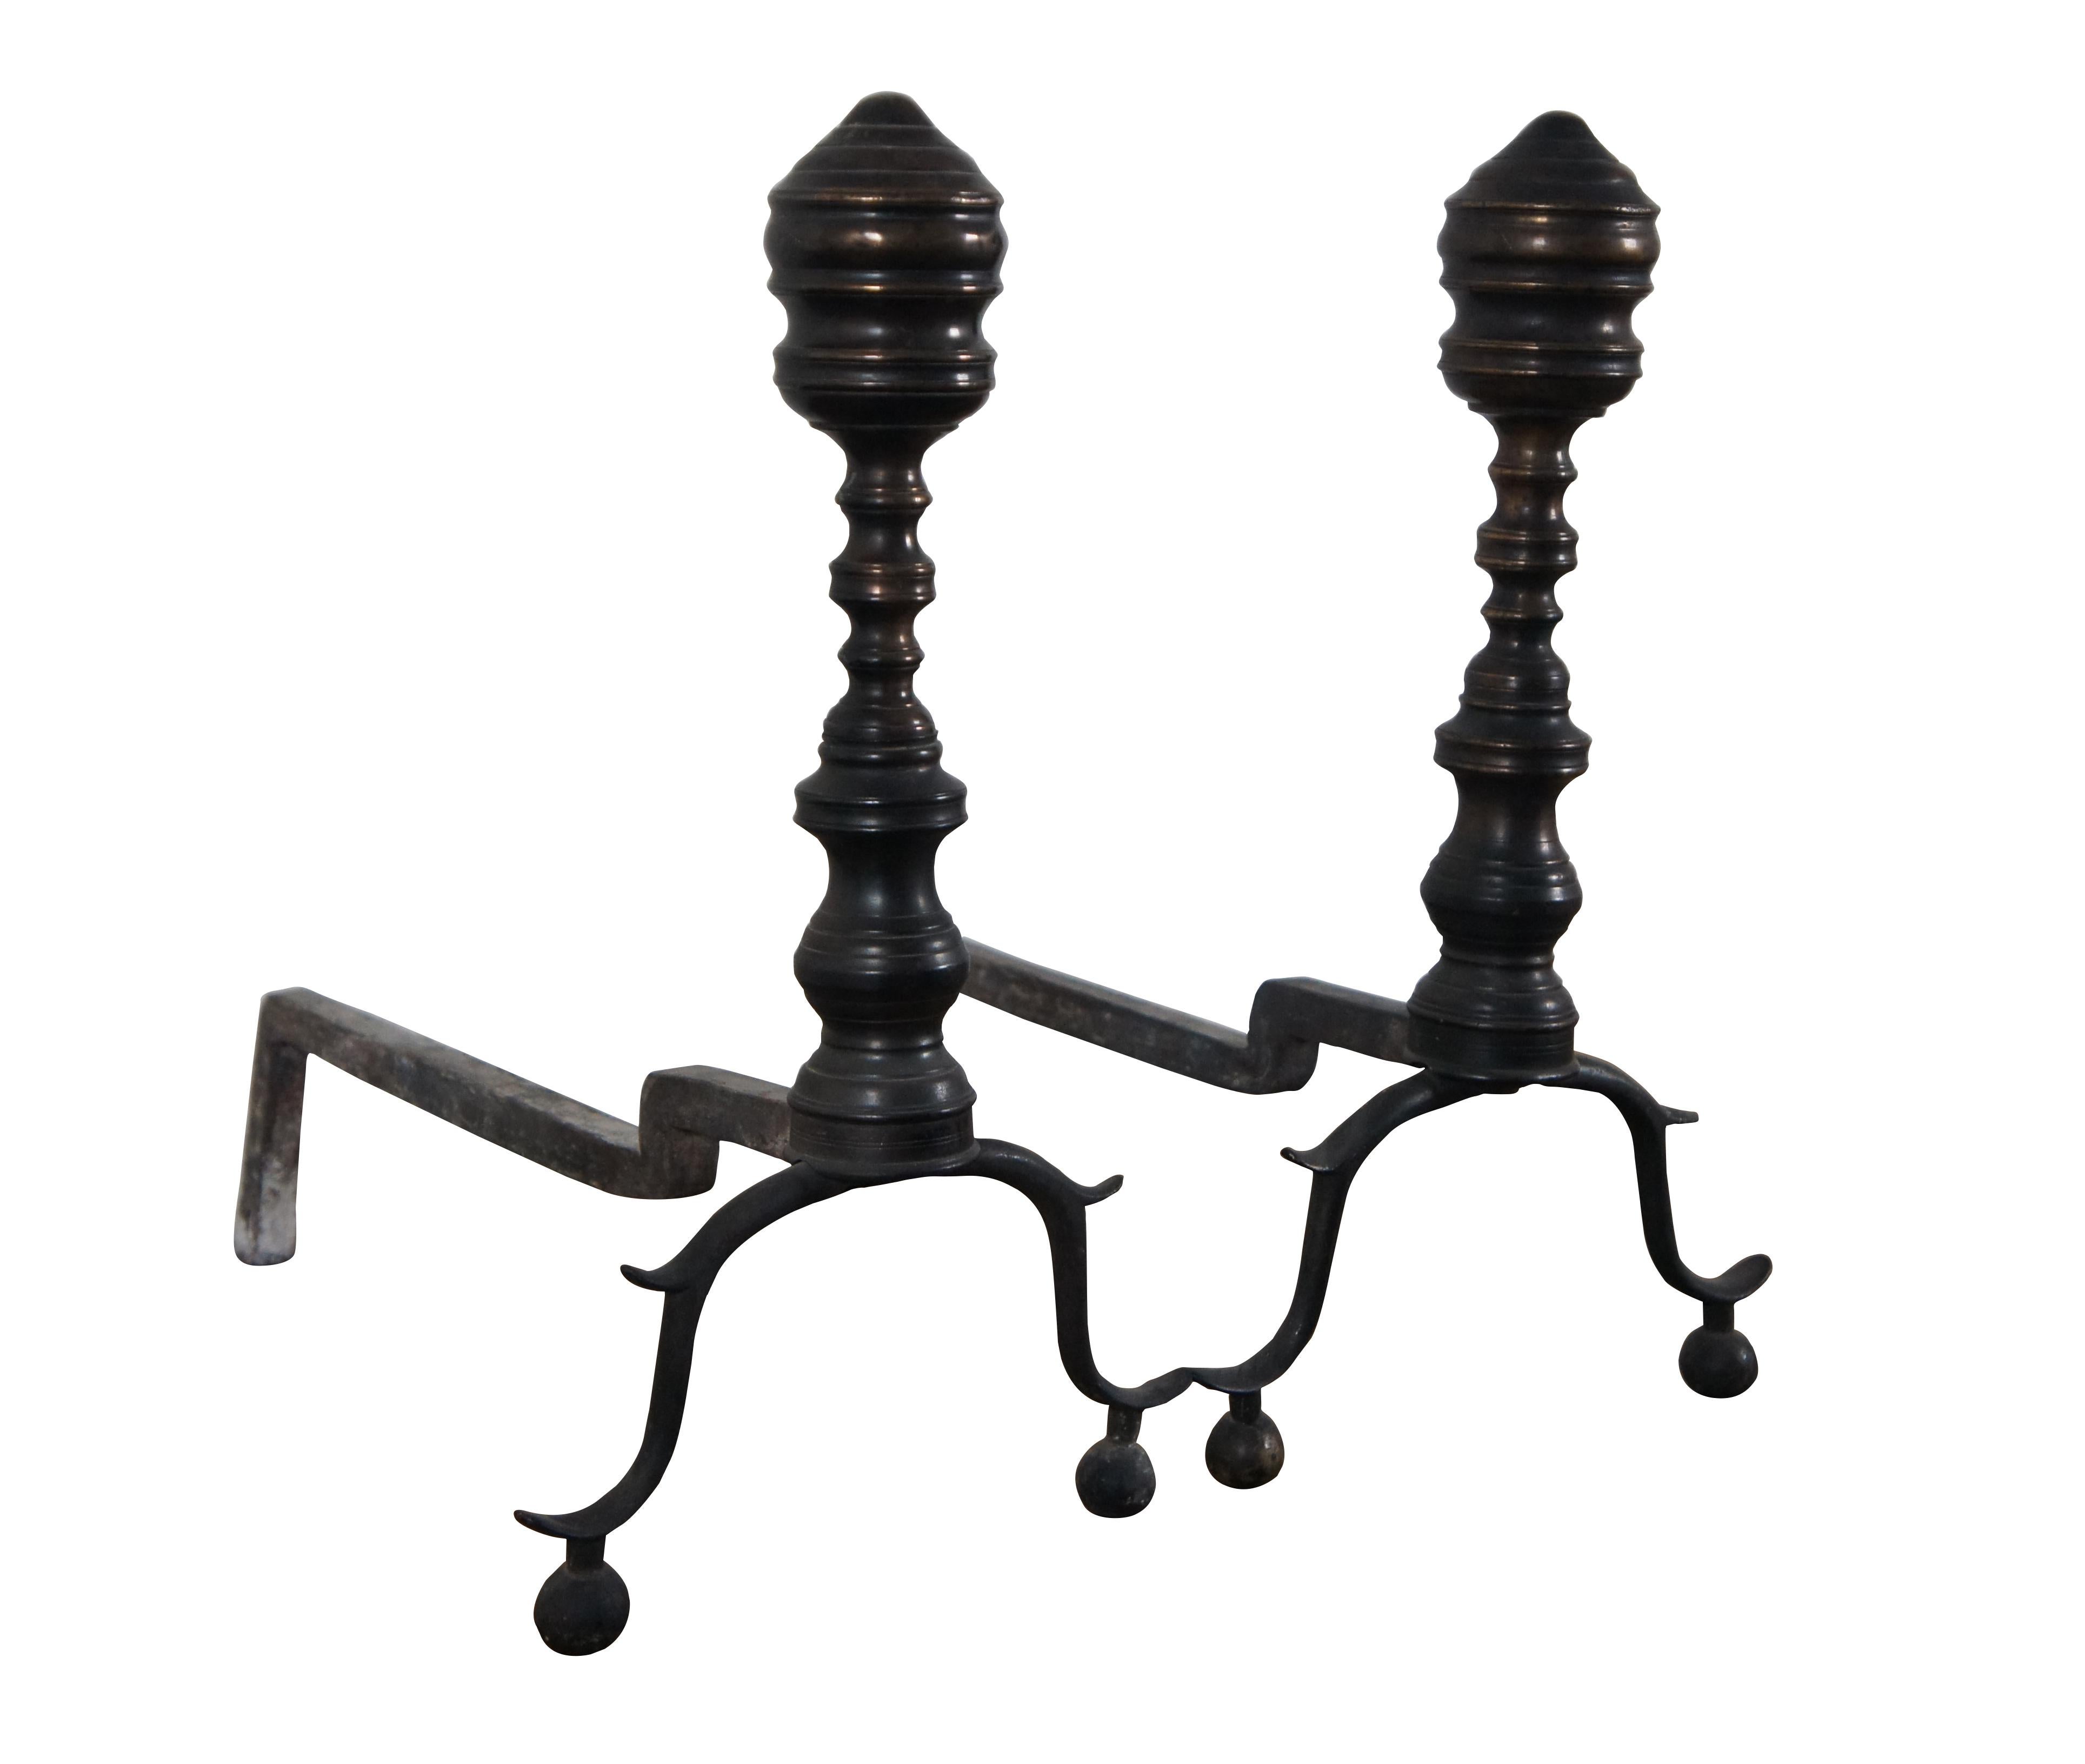 Pair of late 18th / early 19th century antique wrought iron and brass andirons / fire dogs featuring Colonial or Georgian styling with bow legs and a lovely dark patina.

Dimensions:
9